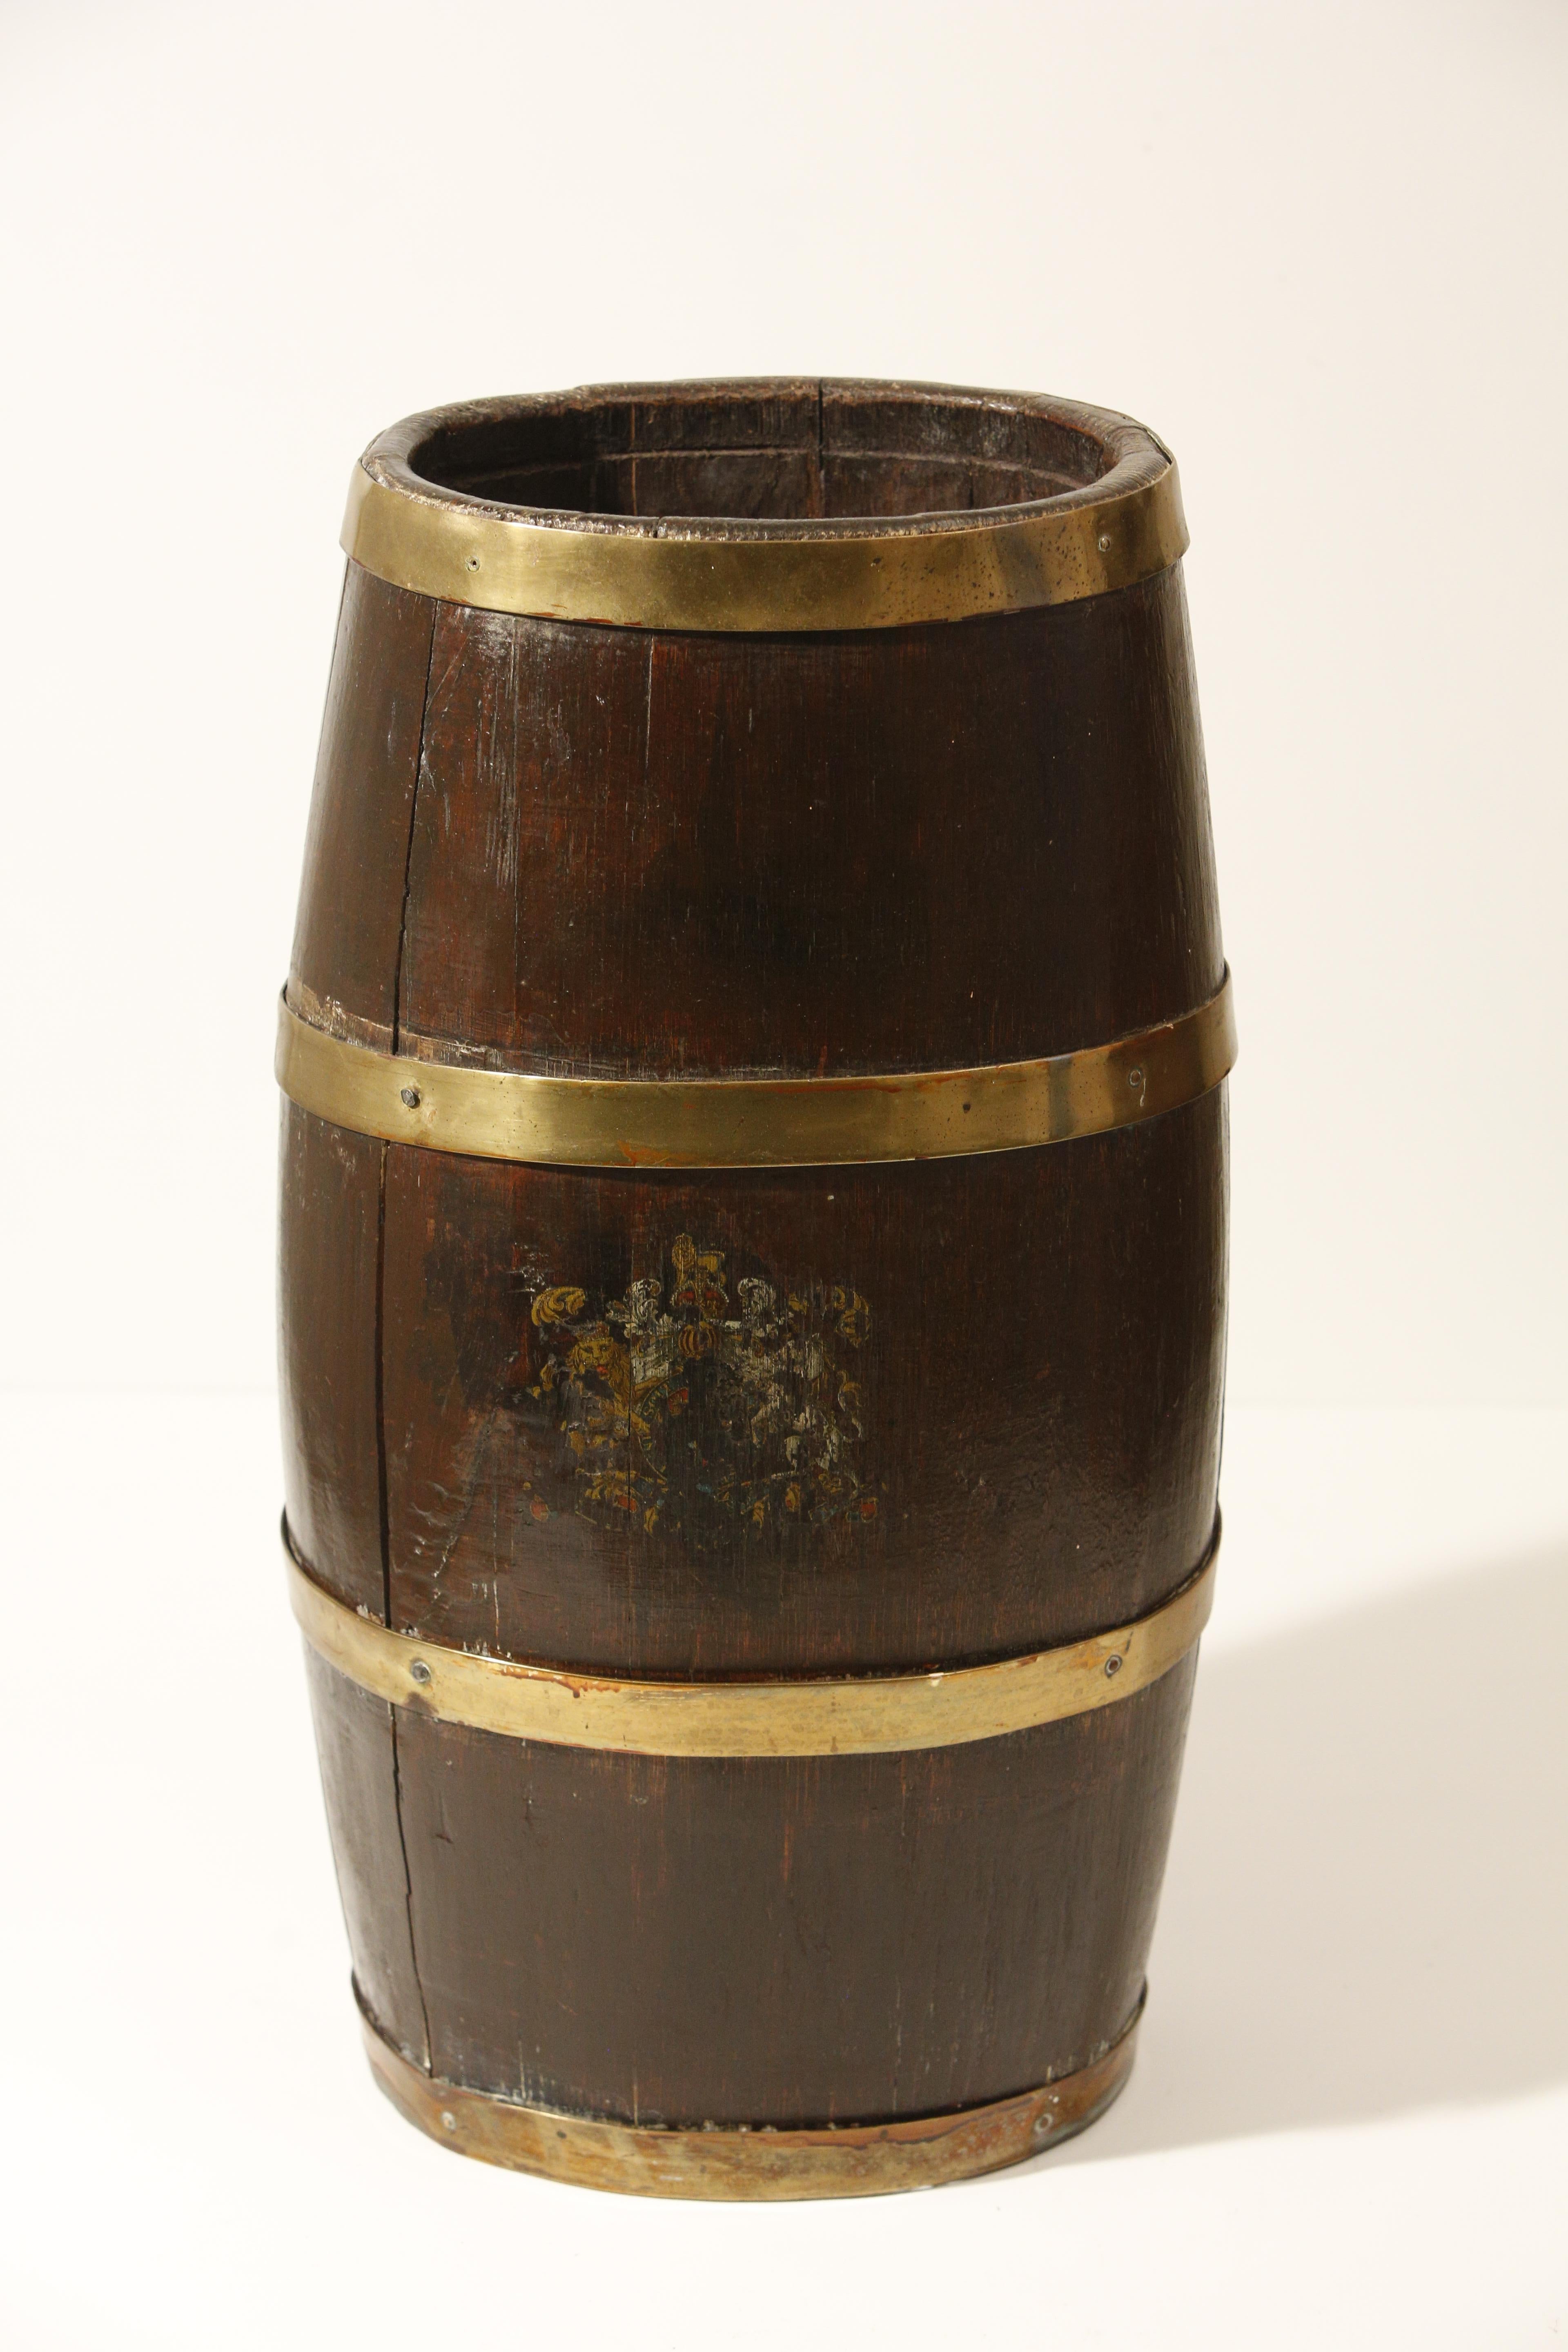 British Oak Barrel Umbrella Stand with Brass Braces English Coat of Arms 19th Century For Sale